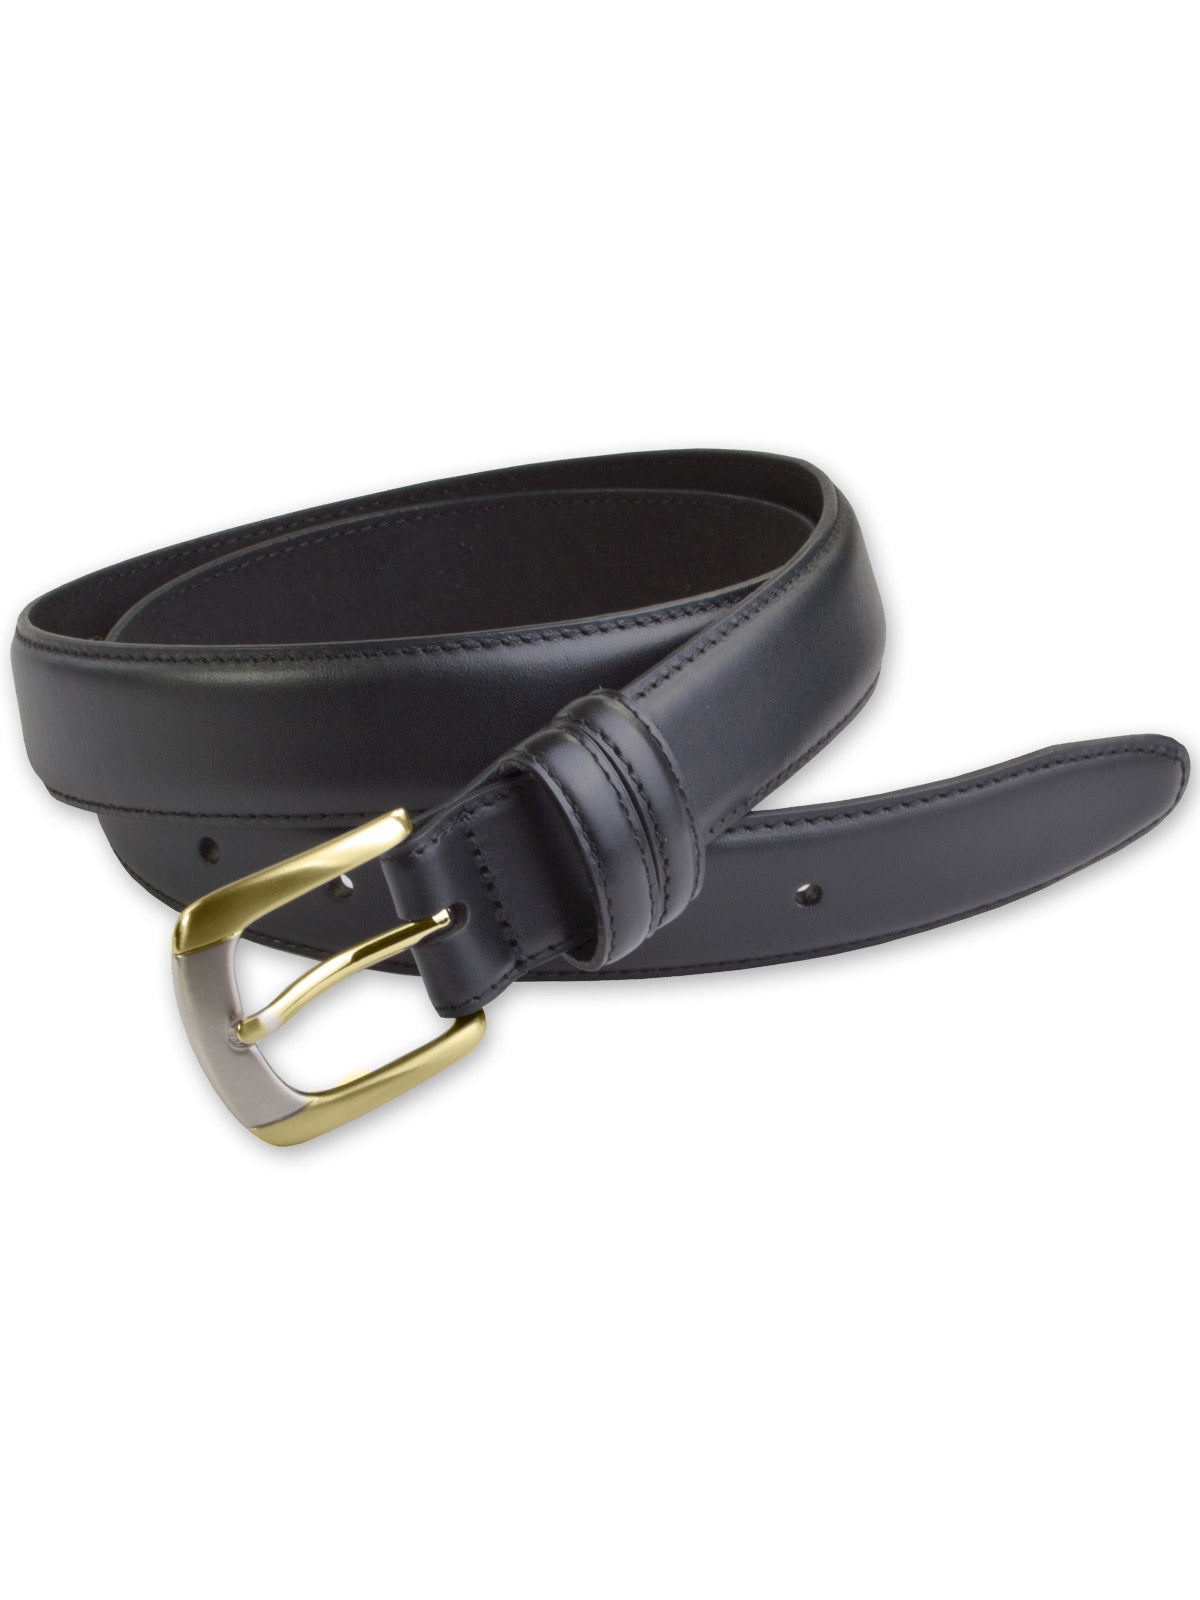 Marc Wolf Leather Dress Belts - Two Tone Buckle (44 - 54)